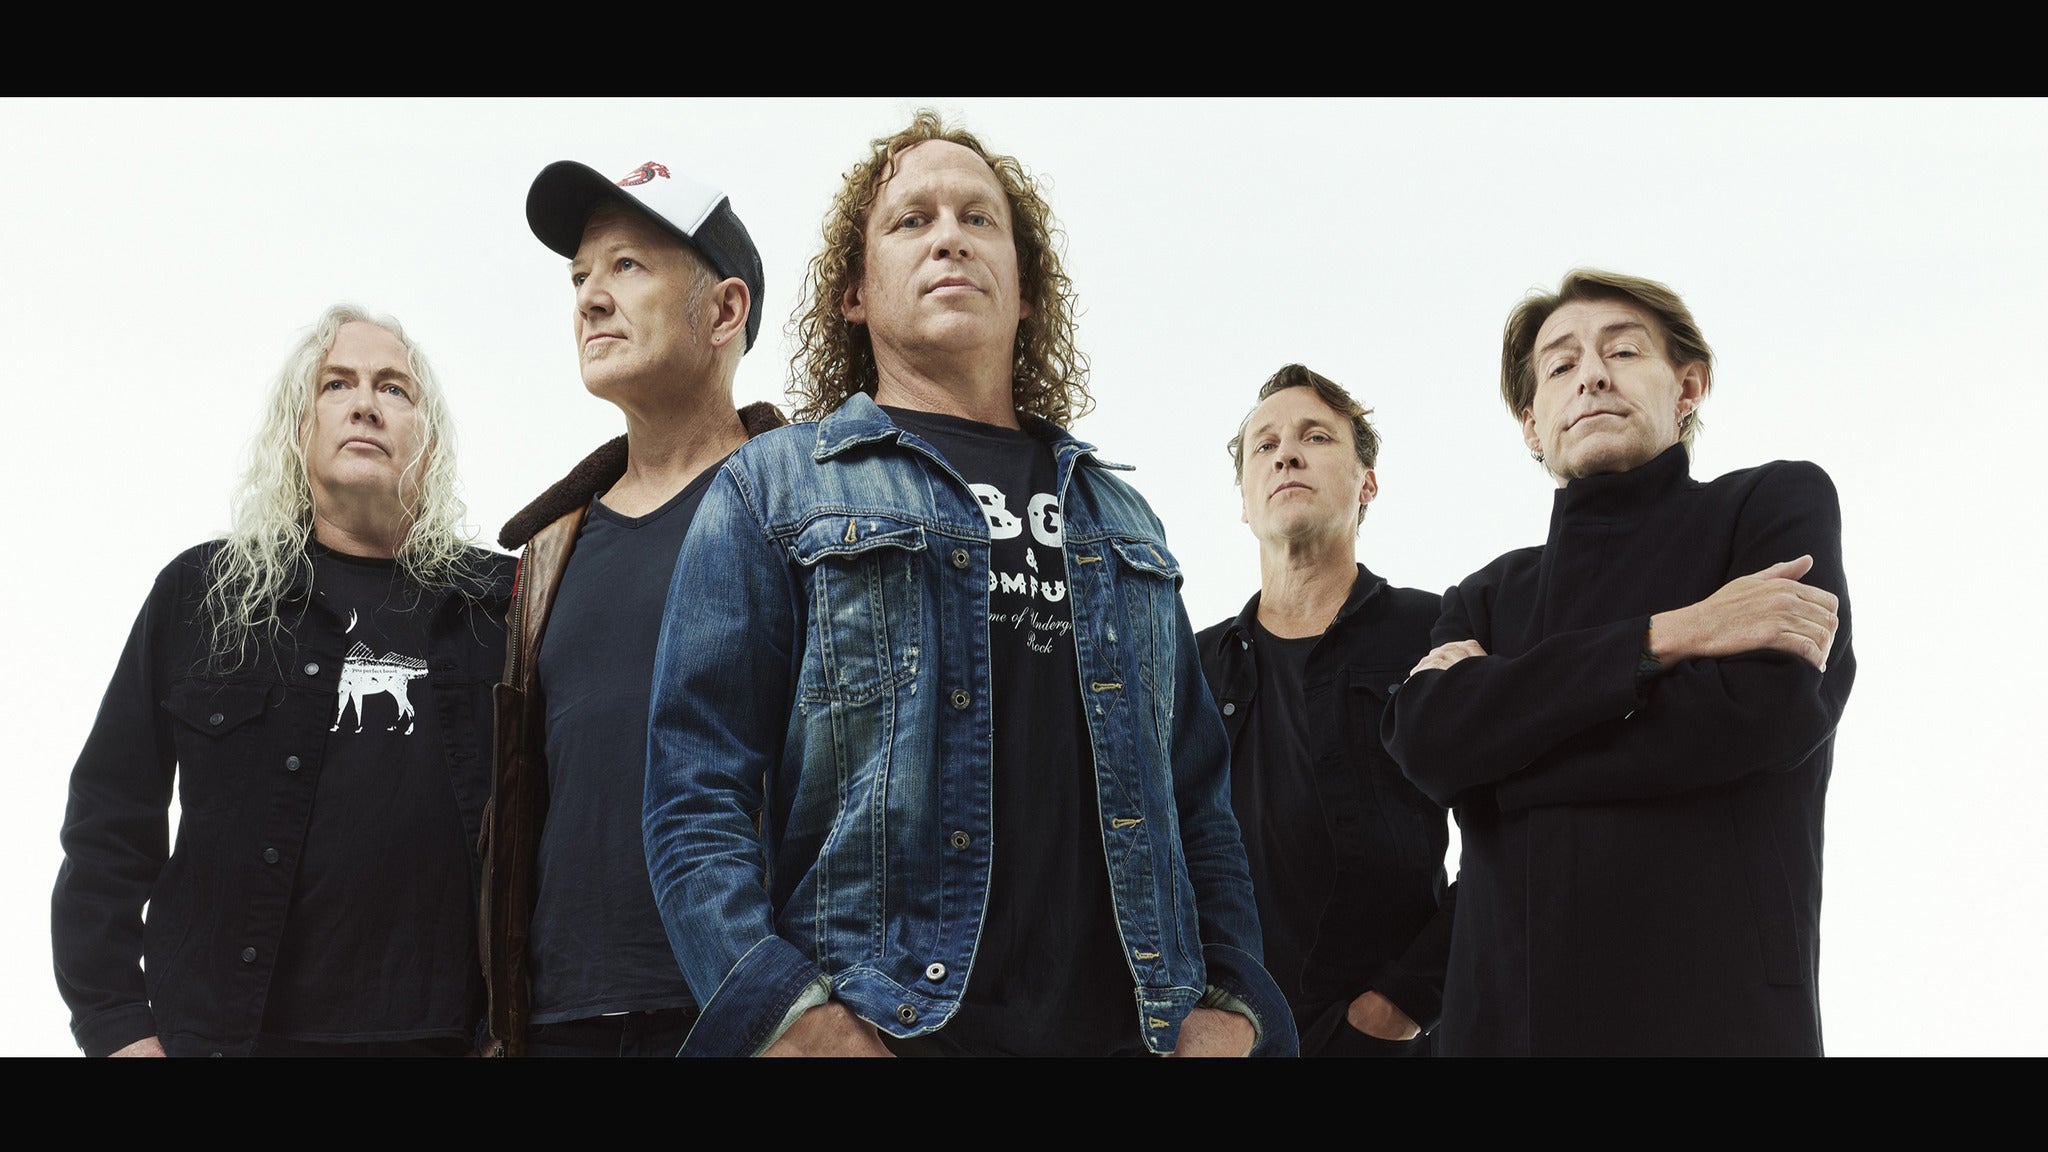 The Screaming Jets